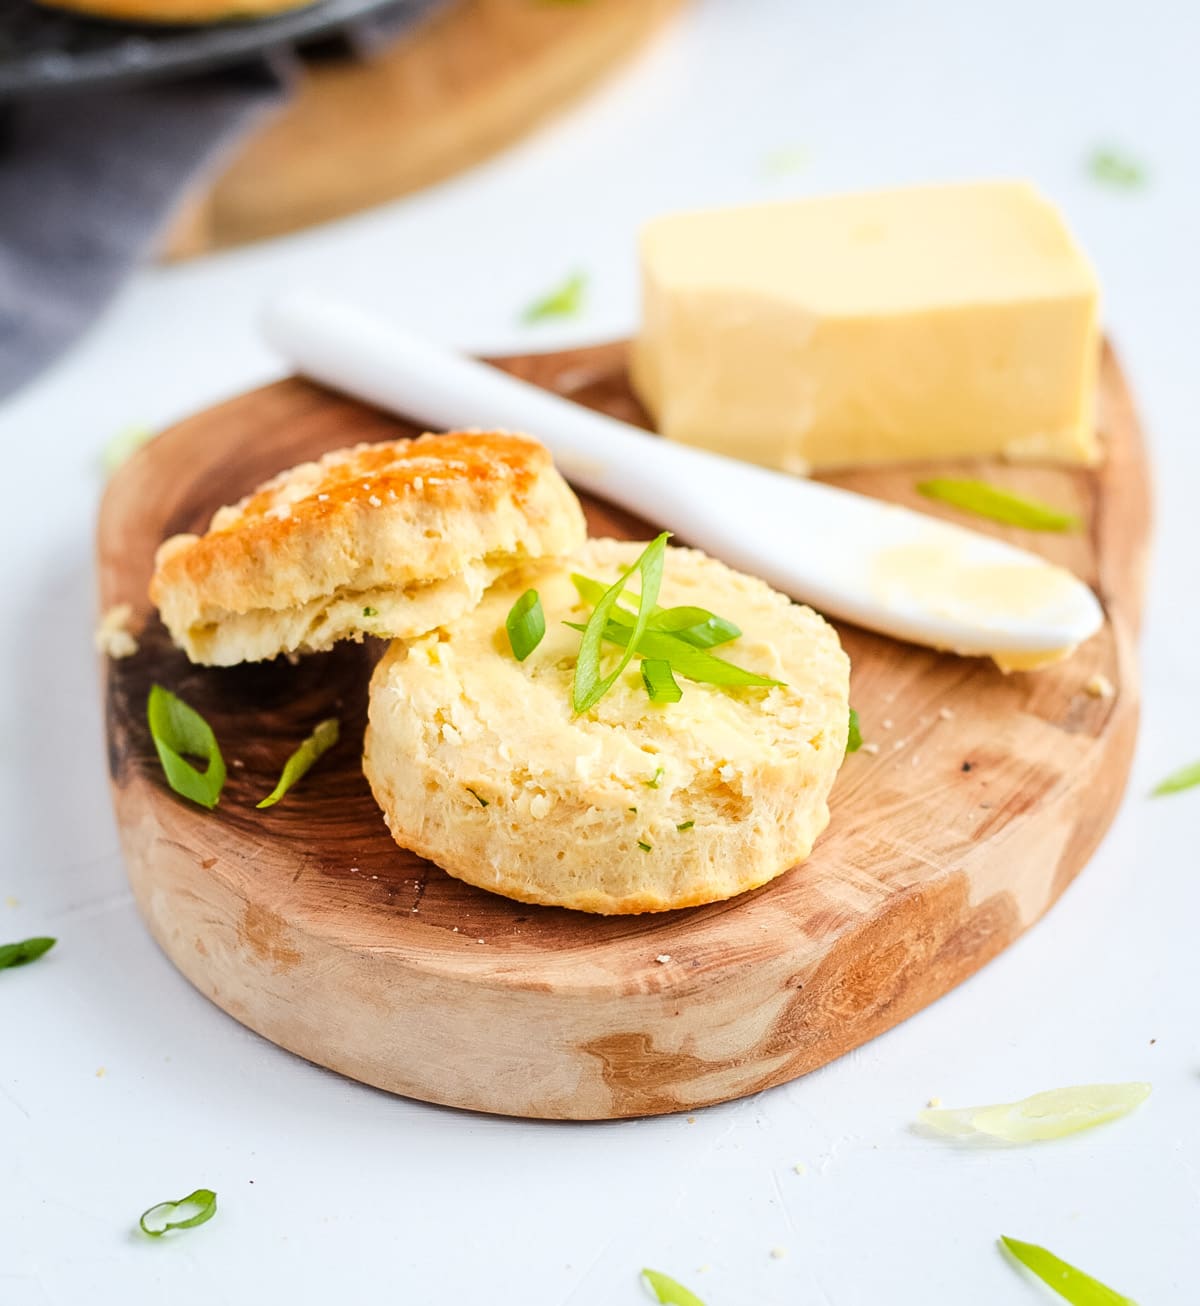 Scone sliced in half with butter and fresh sliced spring onion, over a wooden tray